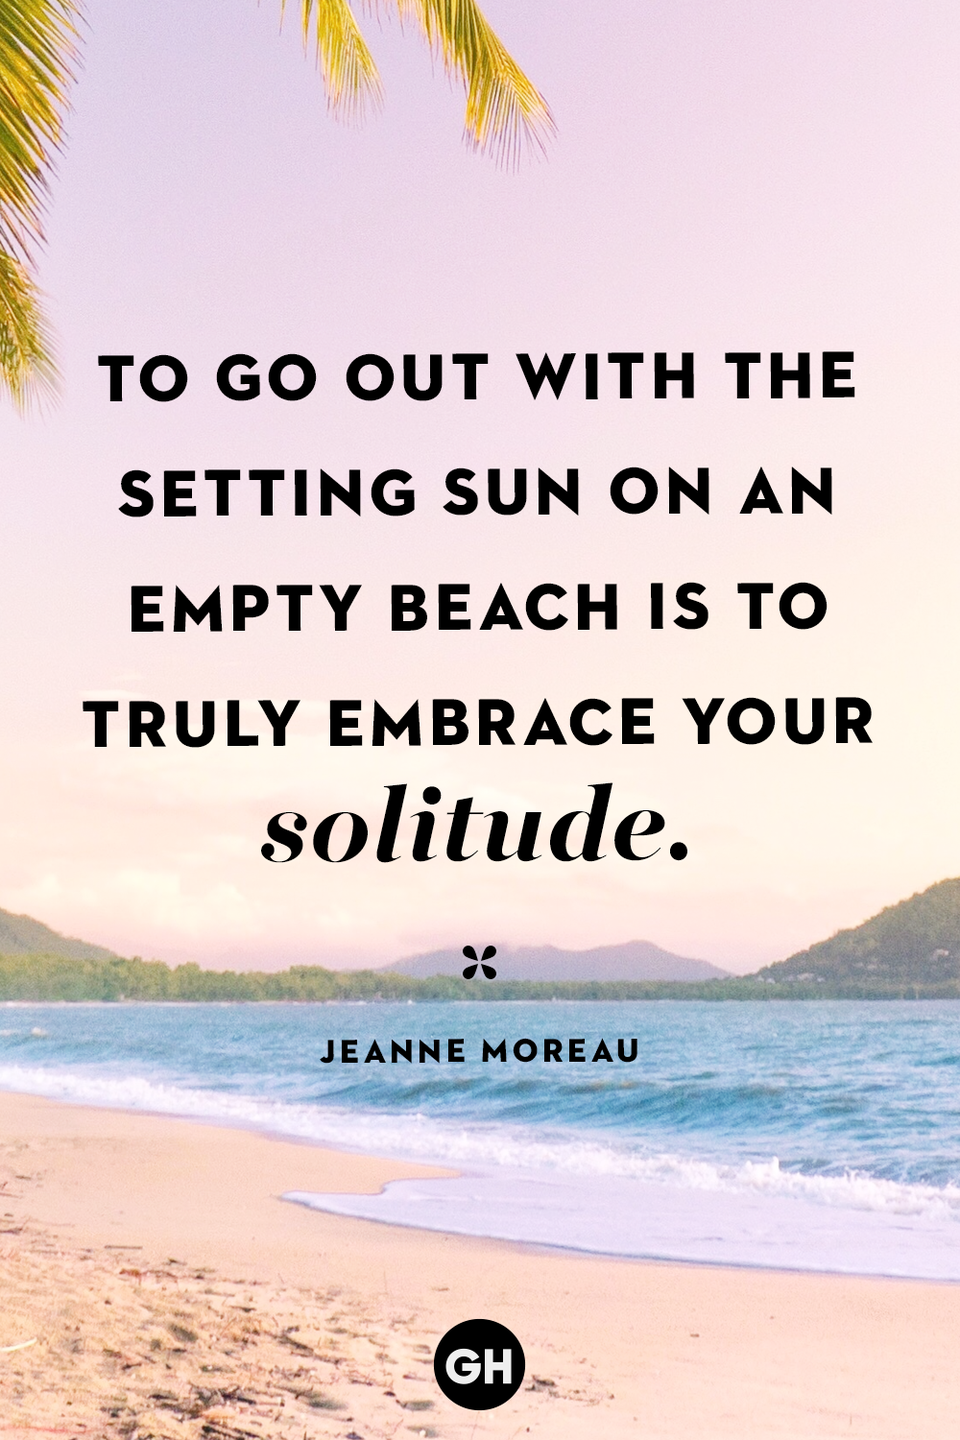 <p>To go out with the setting sun on an empty beach is to truly embrace your solitude.</p>